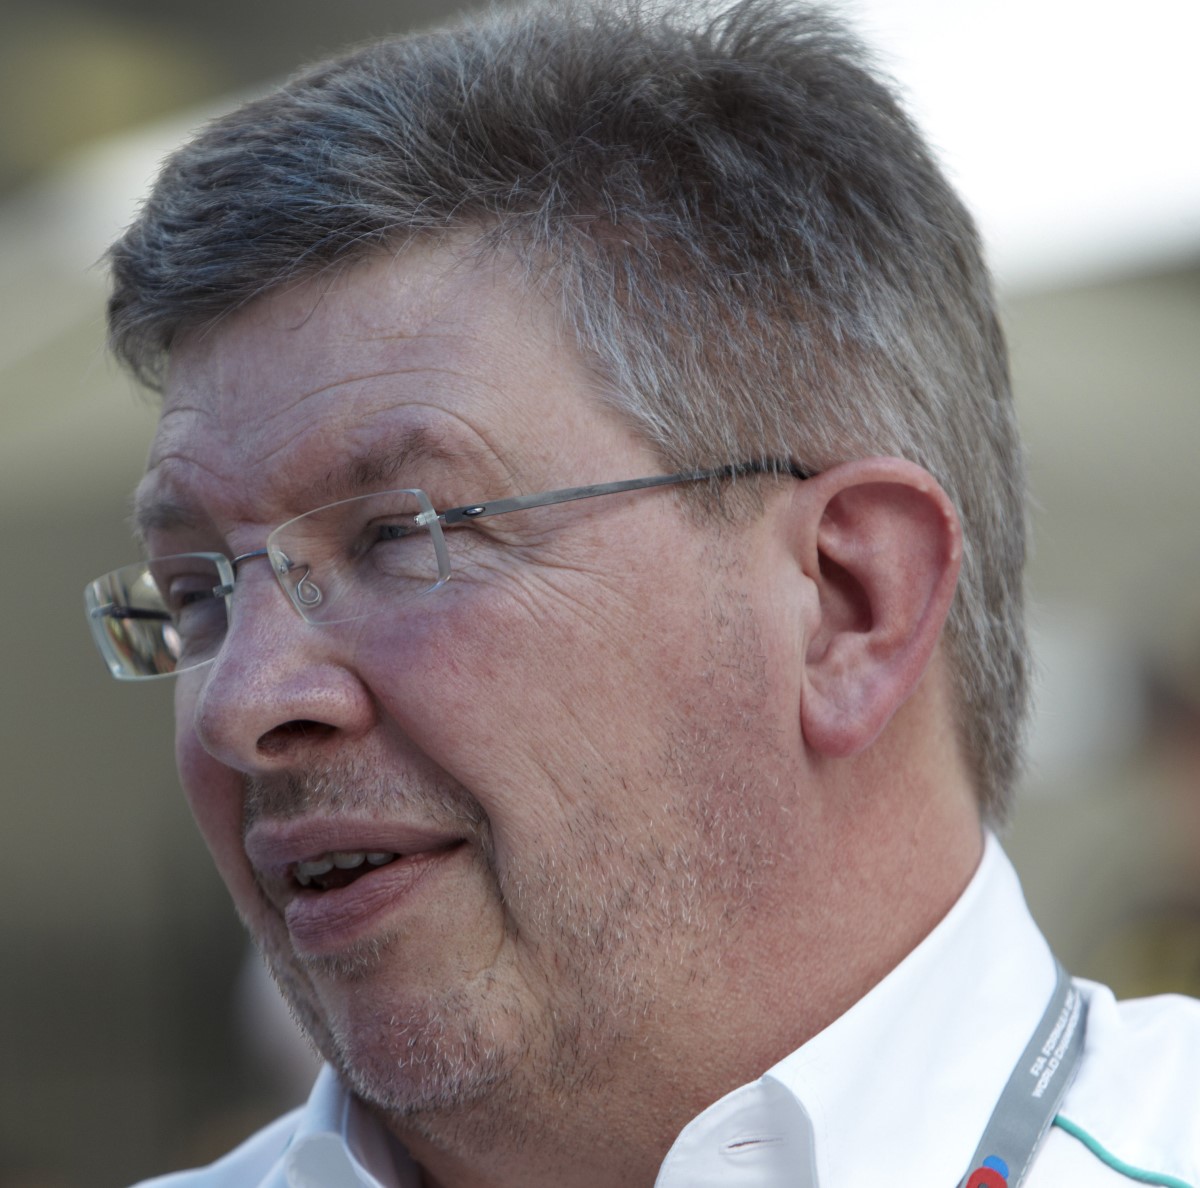 Ross Brawn. AR1.com has said for a long time tha if F1 and IndyCar wants to stay relevant to passenger car, they must convert to 100% electric motors. The silence will be deafening and the fans will head for the exits.